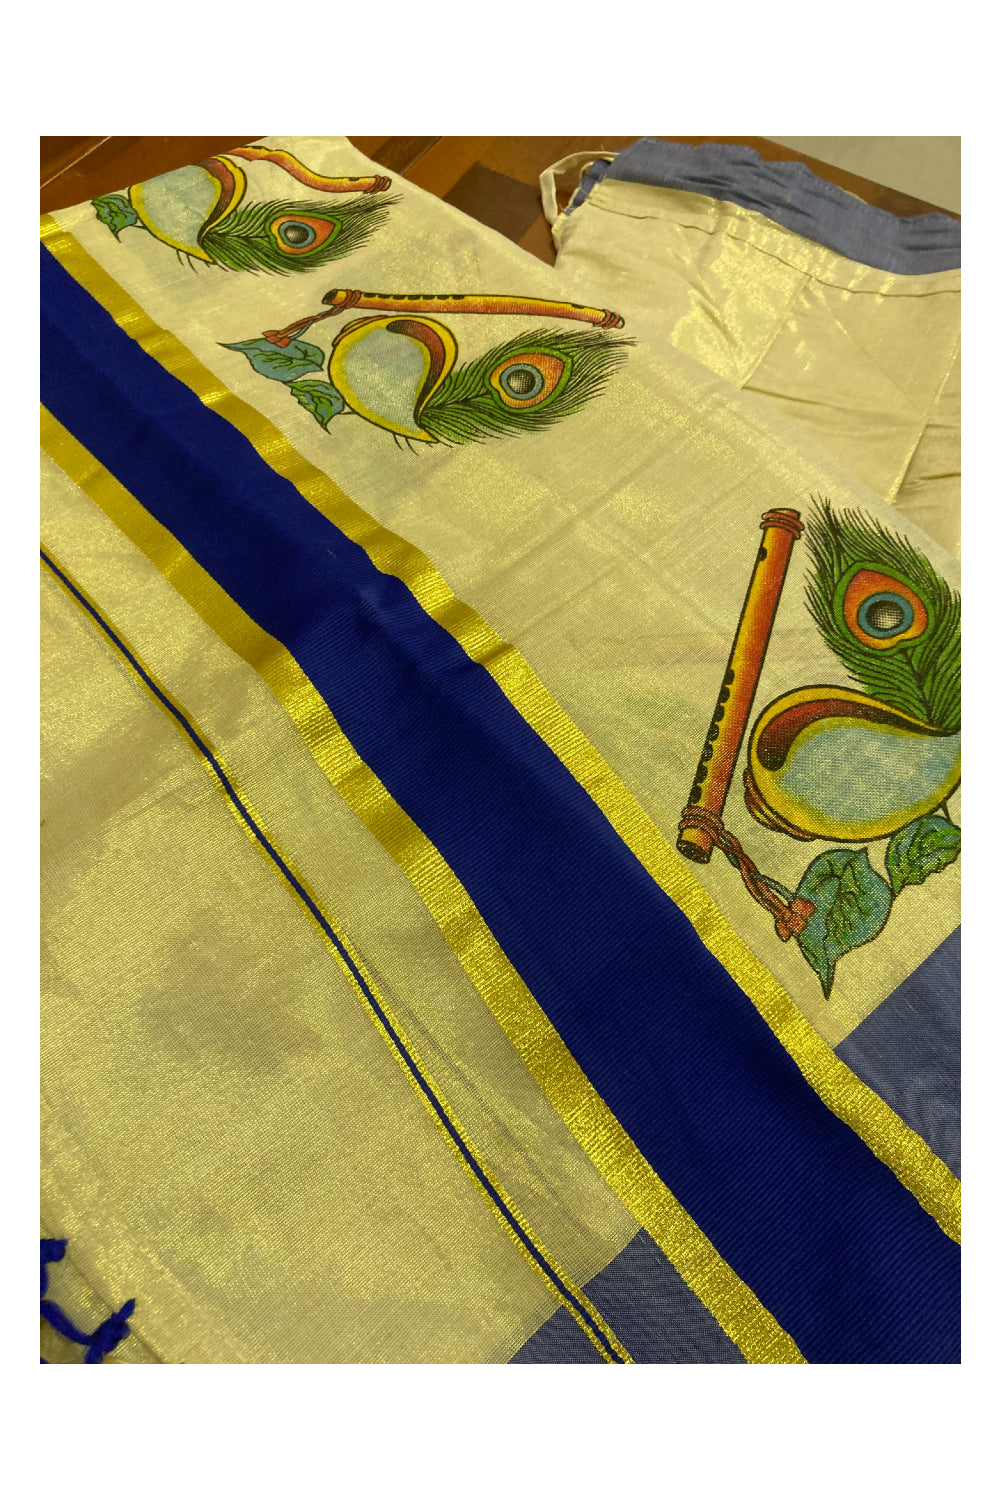 Kerala Tissue Stitched Dhavani Set with Blouse Piece and Neriyathu in with Mural Designs